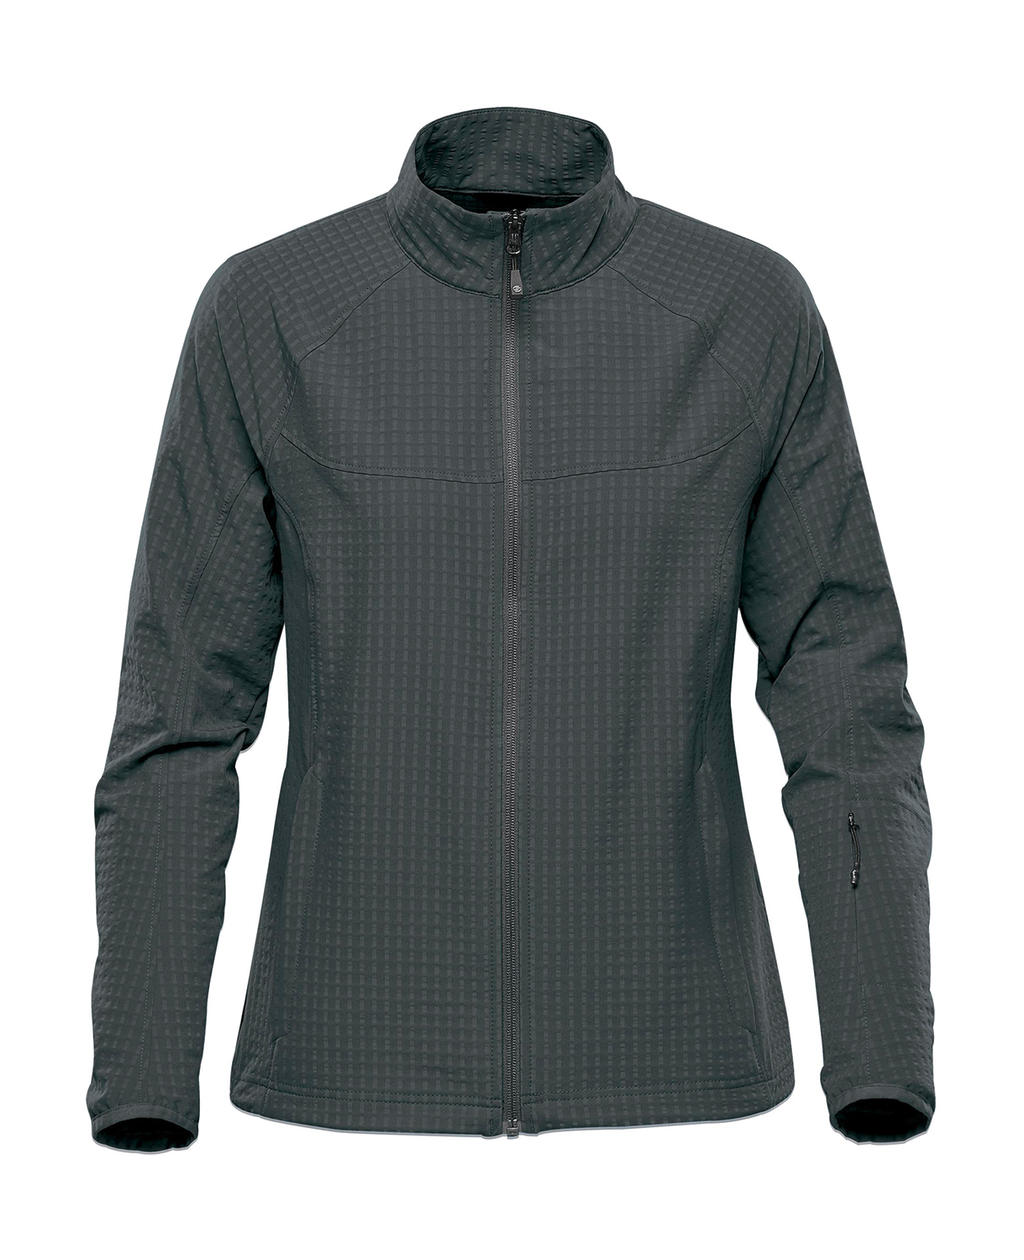  Womens Kyoto Jacket in Farbe Graphite